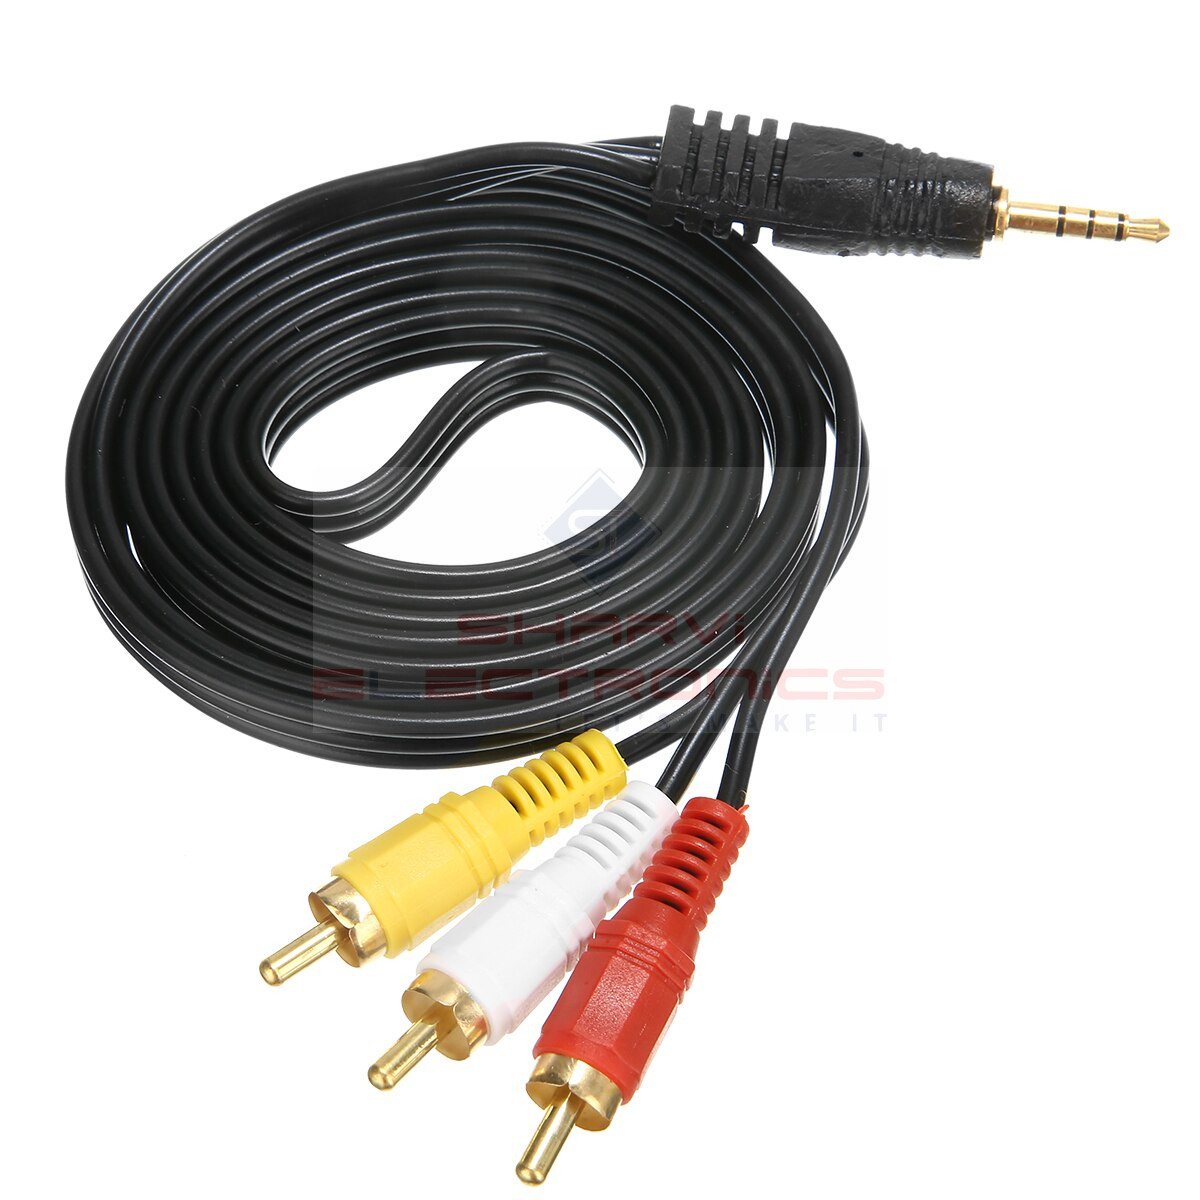 3.5mm Jack Male To 3 RCA Male Converters Audio Video Cable Stereo Adapter-1.5 Meter sharvielectronics.com